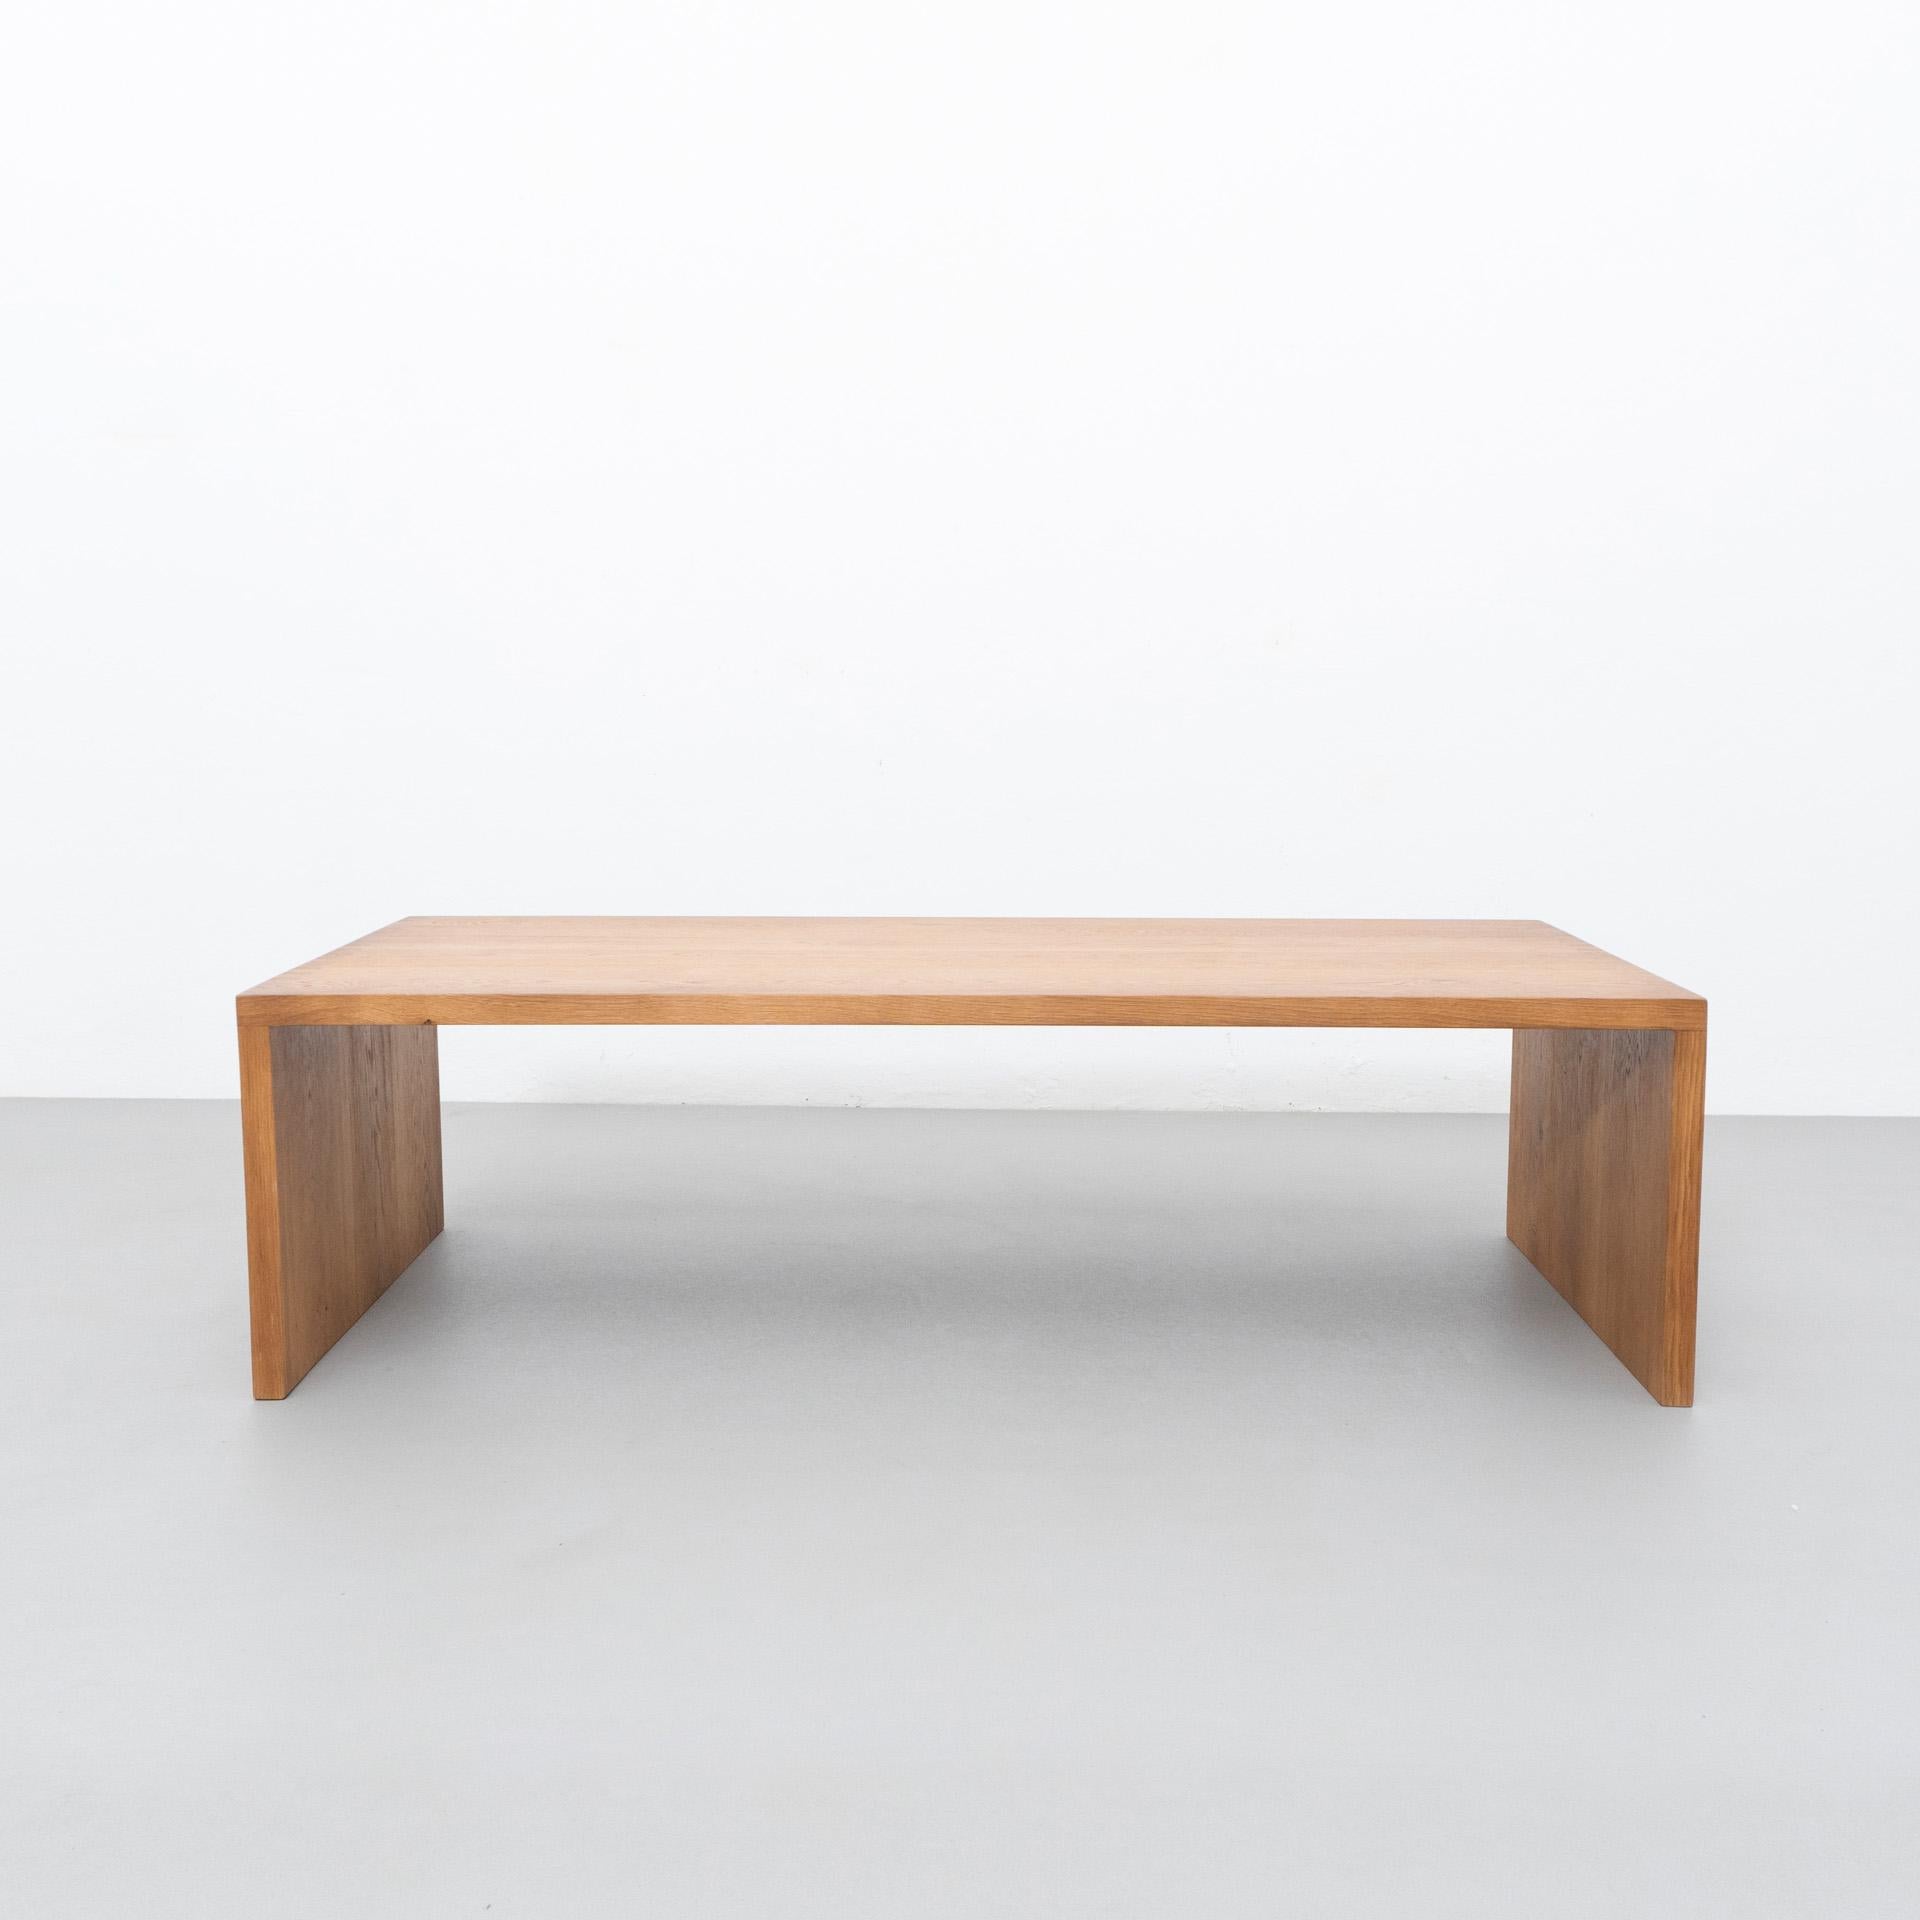 Table by Dada Est. manufactured in Barcelona, 2021.

 Oak table

Measures: 62 cm D x 140 cm W x 40 cm H 

Production delay: 8-9 weeks

There is the possibility of making it in different measures and woods.

Dada Est. Makes a handmade